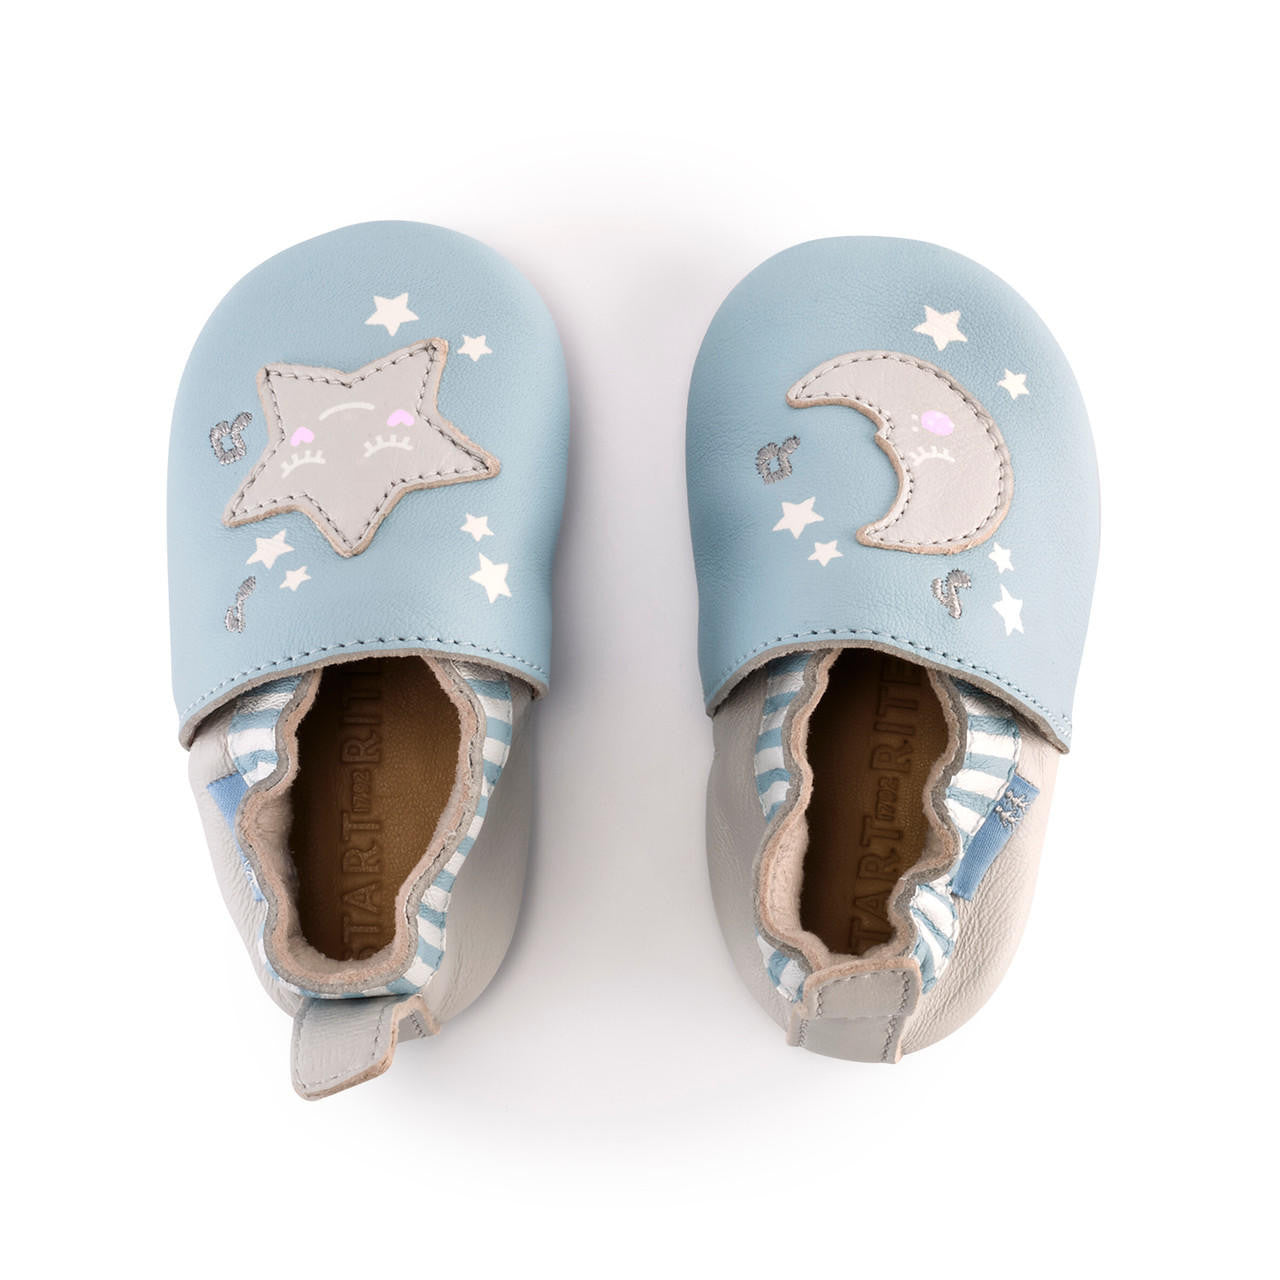 A unisex pram shoe by Start-Rite. Style is fable, a pull on in pale blue leather. Top view.